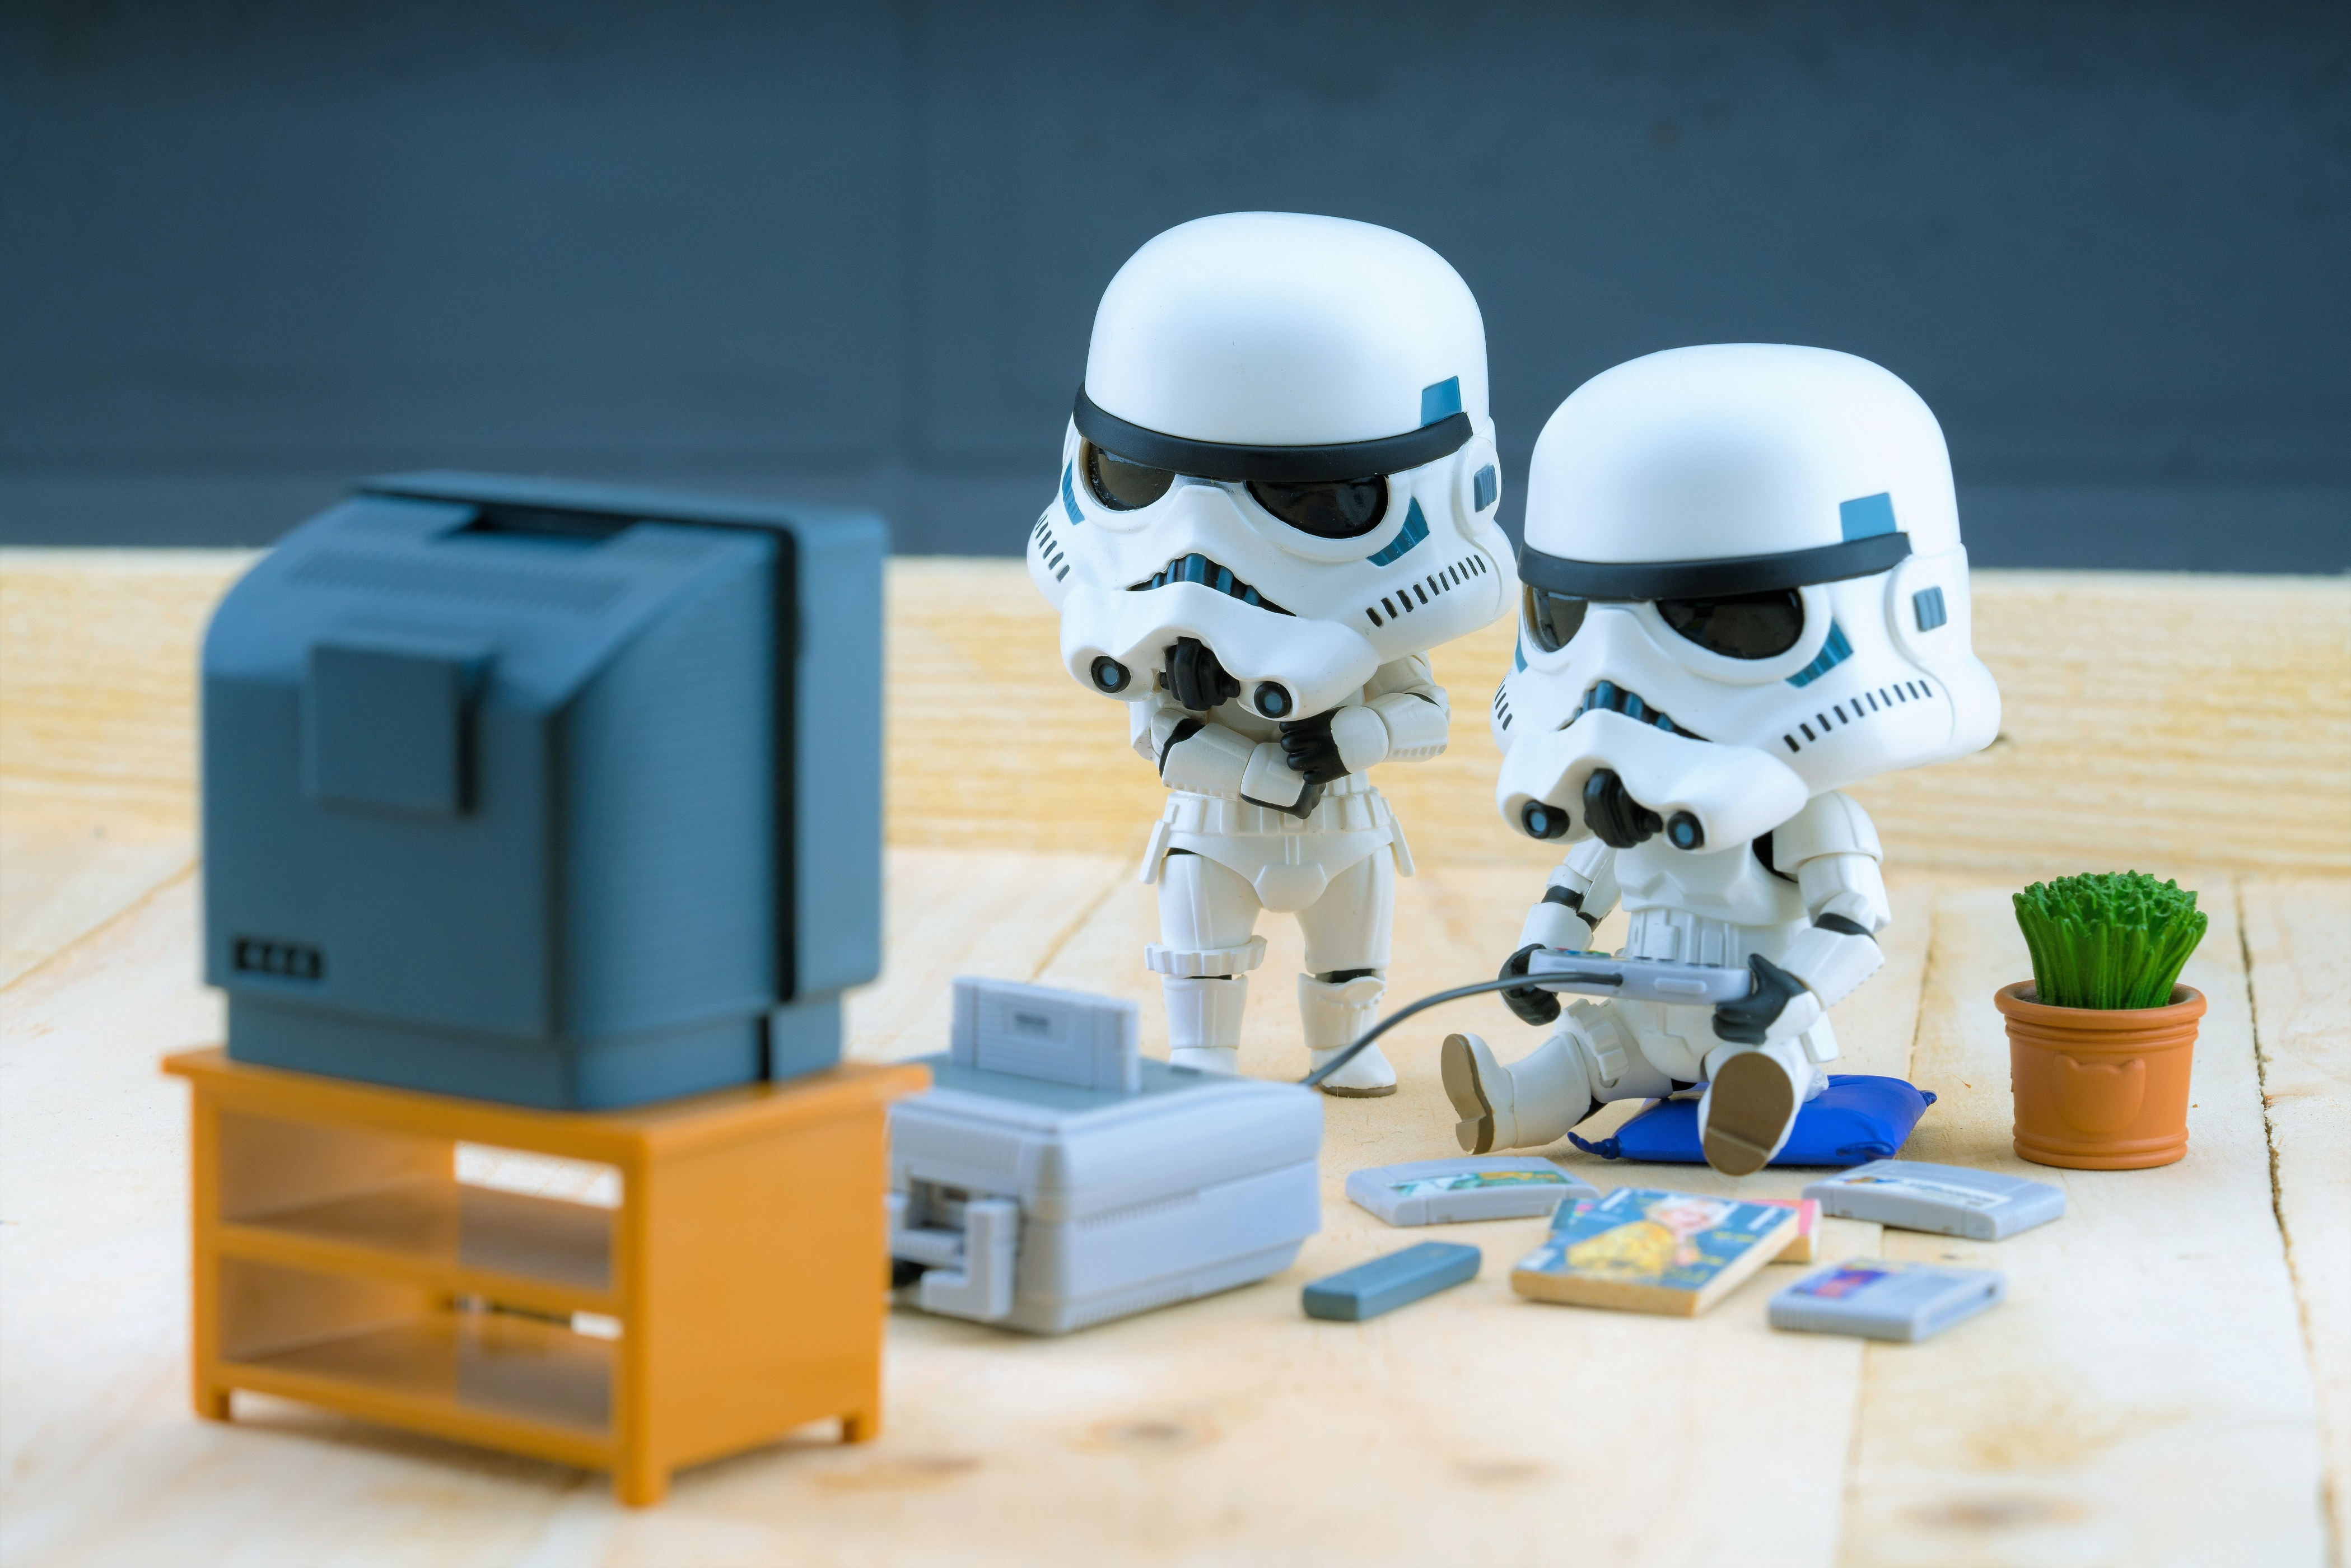 Stormtroopers figure model playing the game, The stormtroopers are soldiers in the Star Wars The Force Awakens